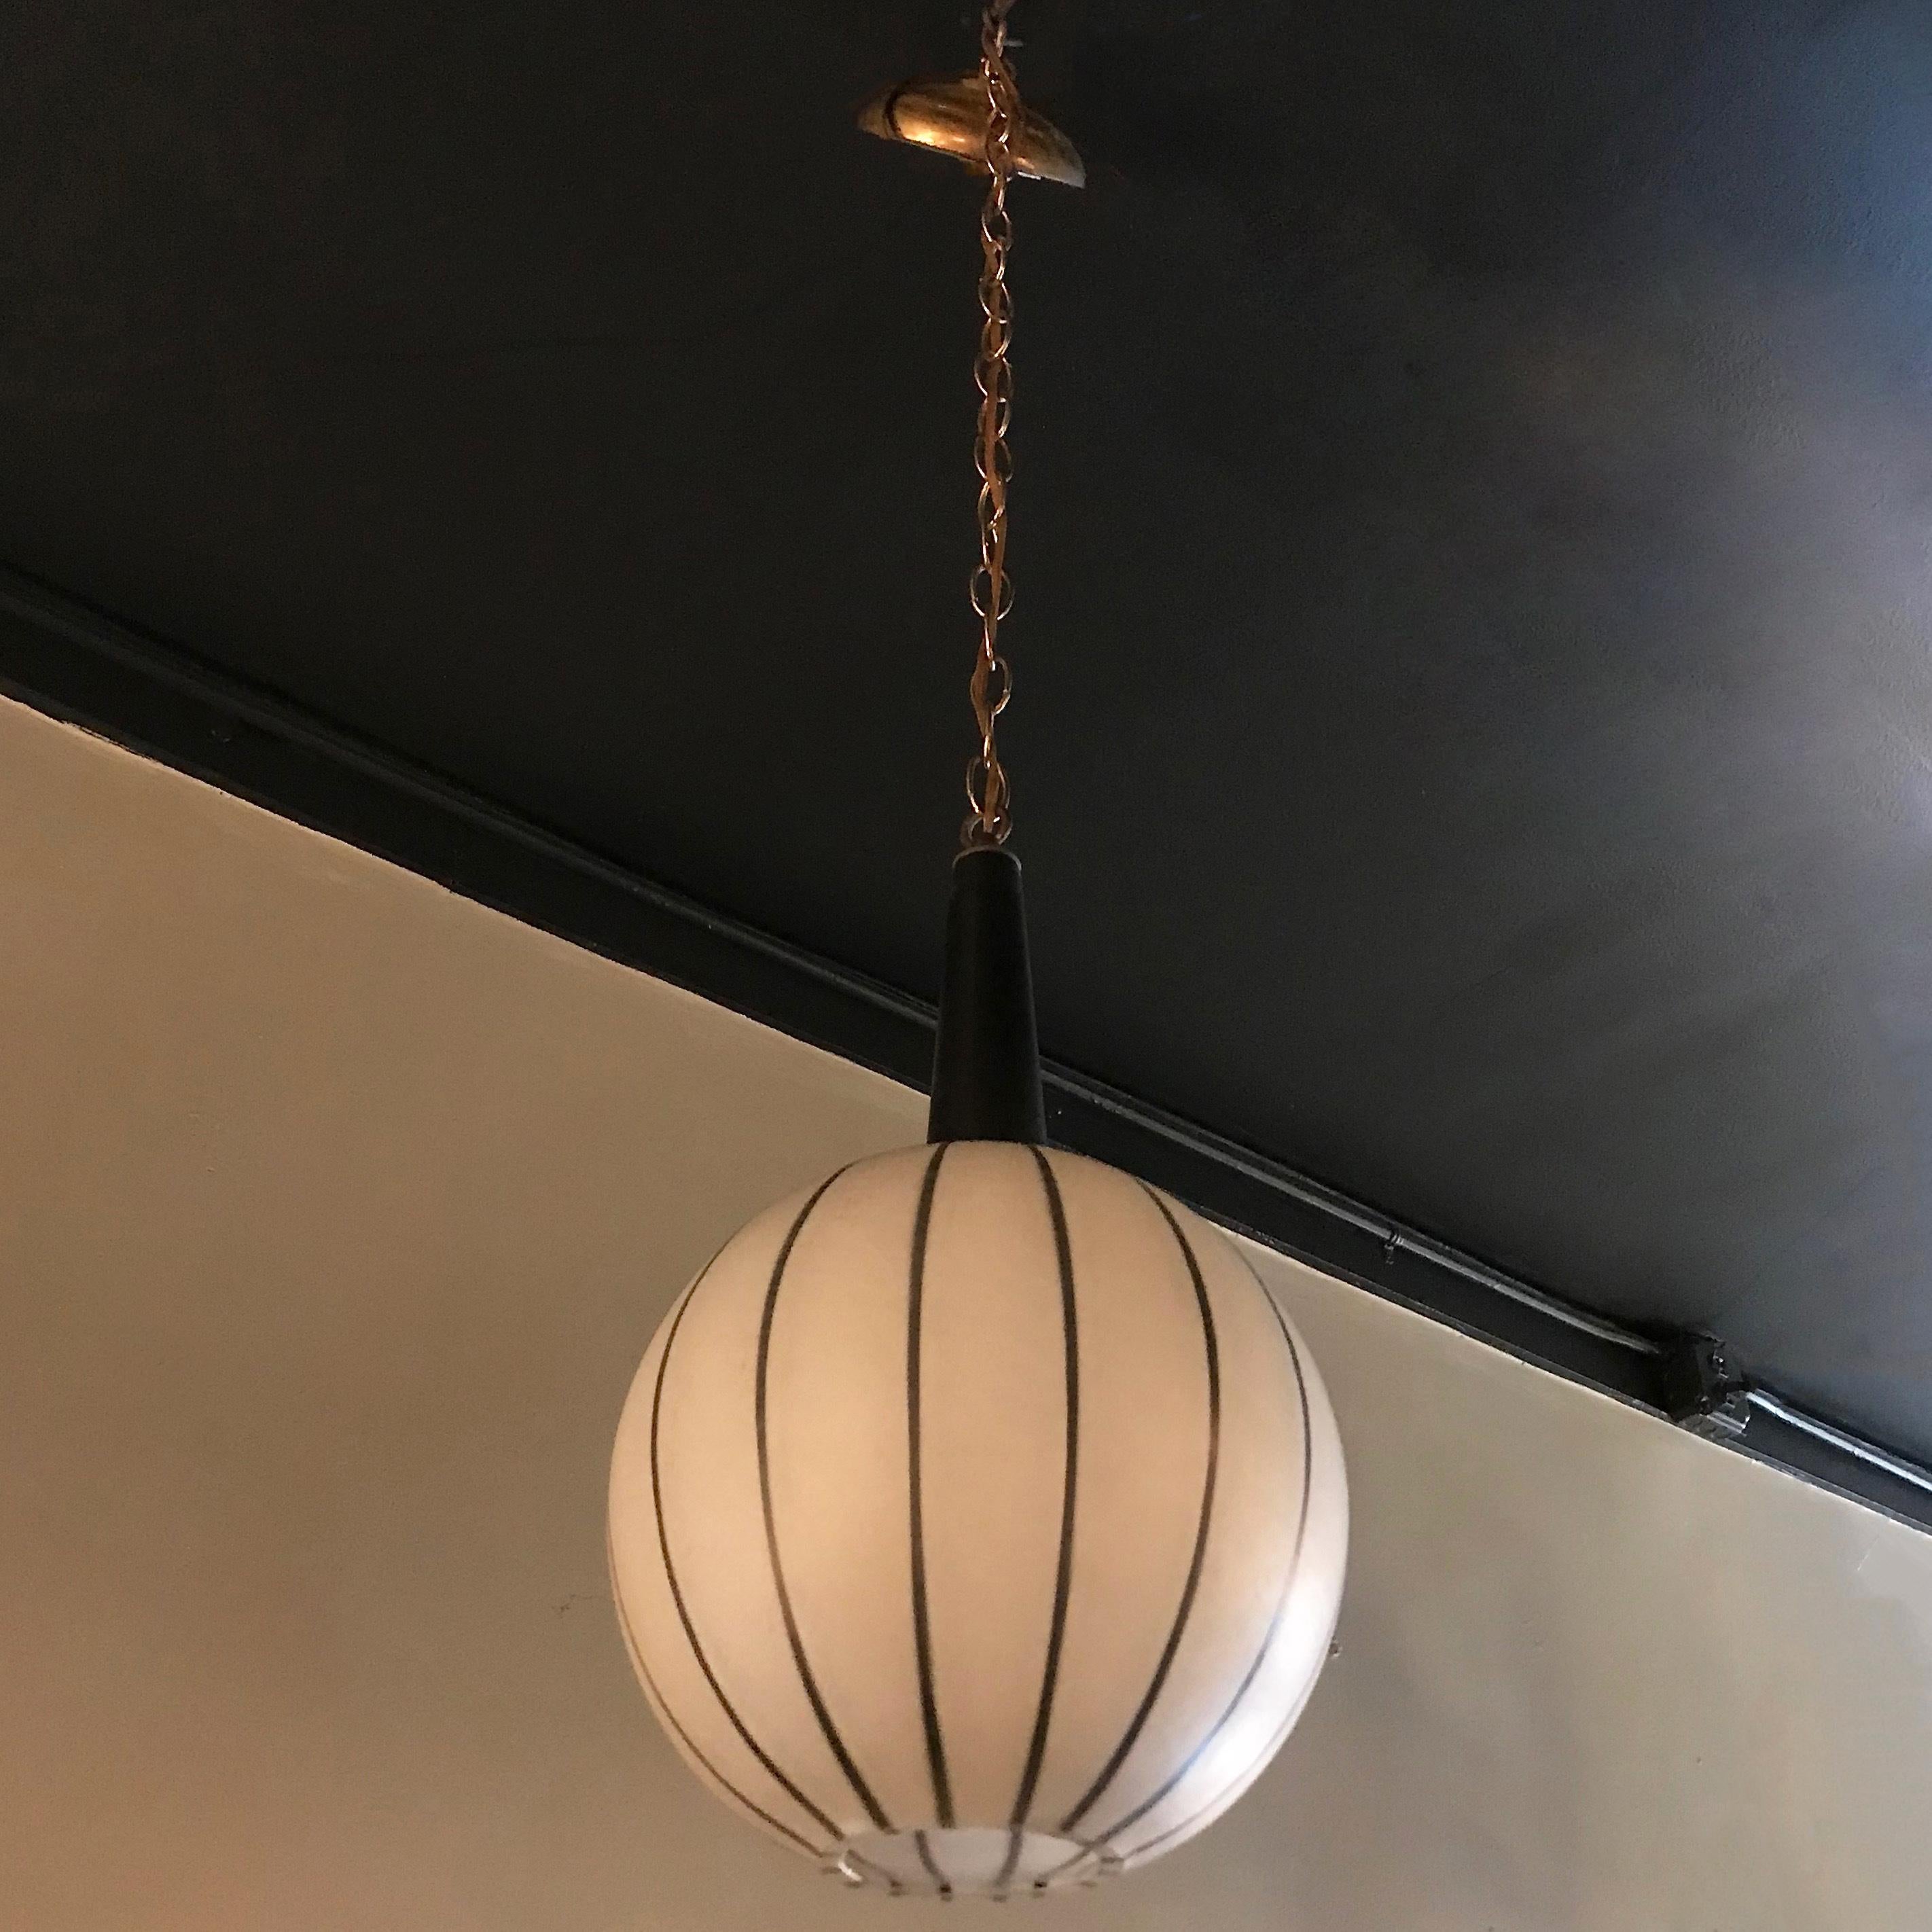 Swedish, Mid-Century Modern, pendant light features a graphic, black and white striped, crackle textured glass, open globe shade with black stem on 24 inches of brass chain with matching canopy. The pendant's overall height is 42 inches and is newly